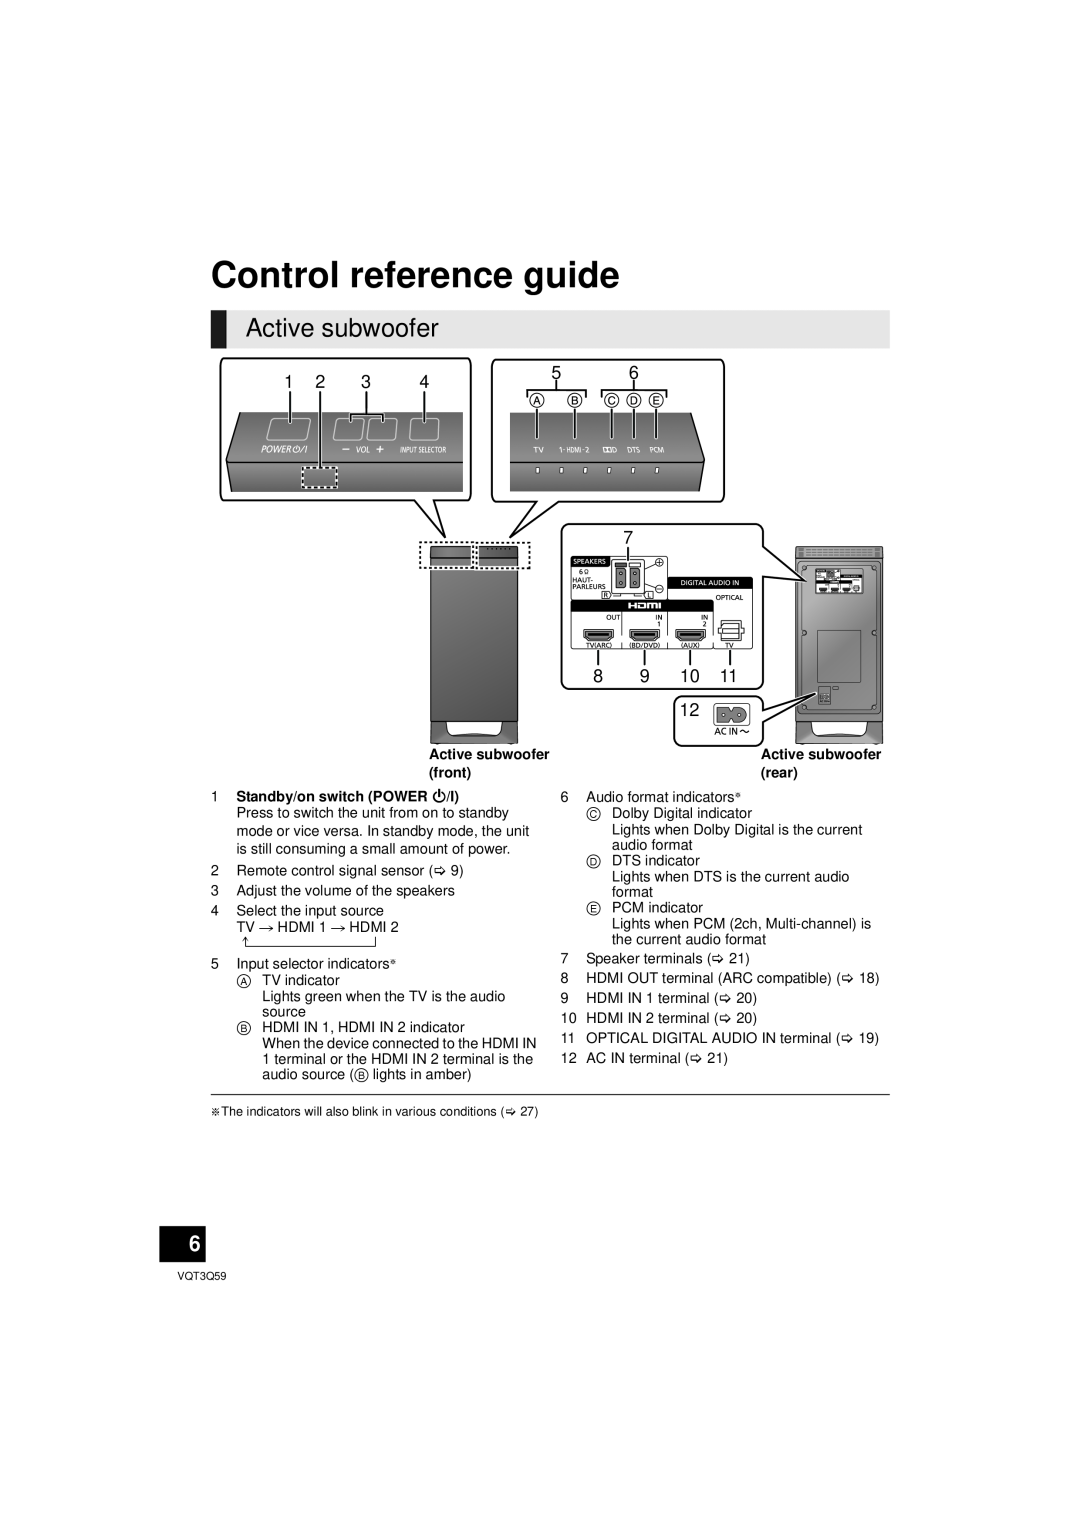 Panasonic SC-HTB15 owner manual Control reference guide, Active subwoofer, 1Standby/on switch POWER Í/I 